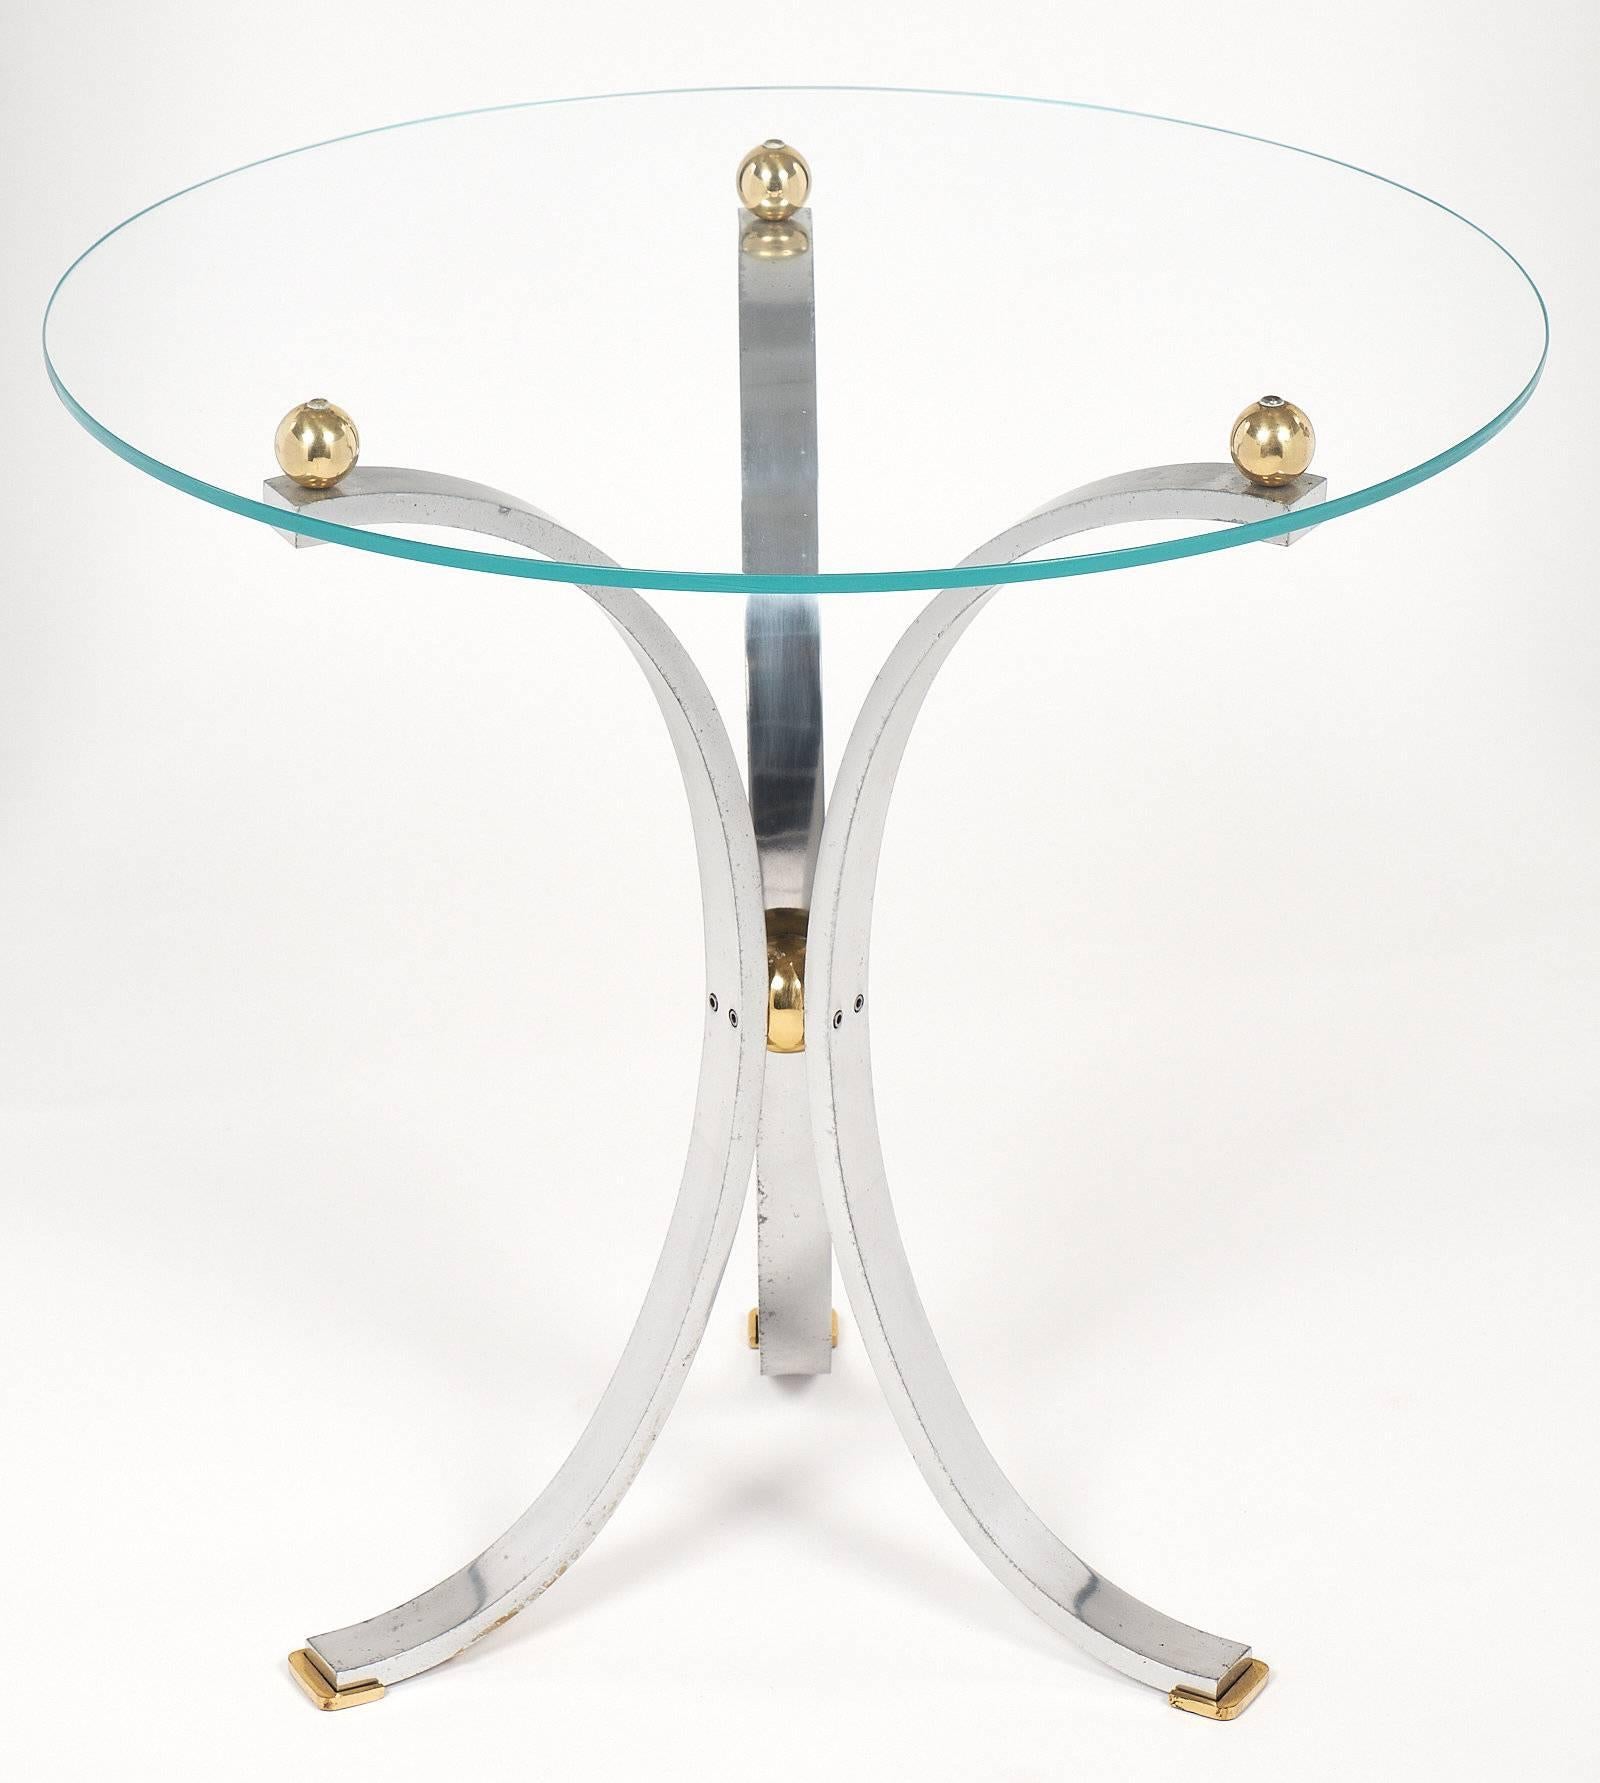 French modernist chrome side table with a gueridon tripod base formed by three chromed steel arches. The base is finished by brass feet at their base, and hold the glass top with three solid brass spheres. The top is 1/4 inch glass. The three legs